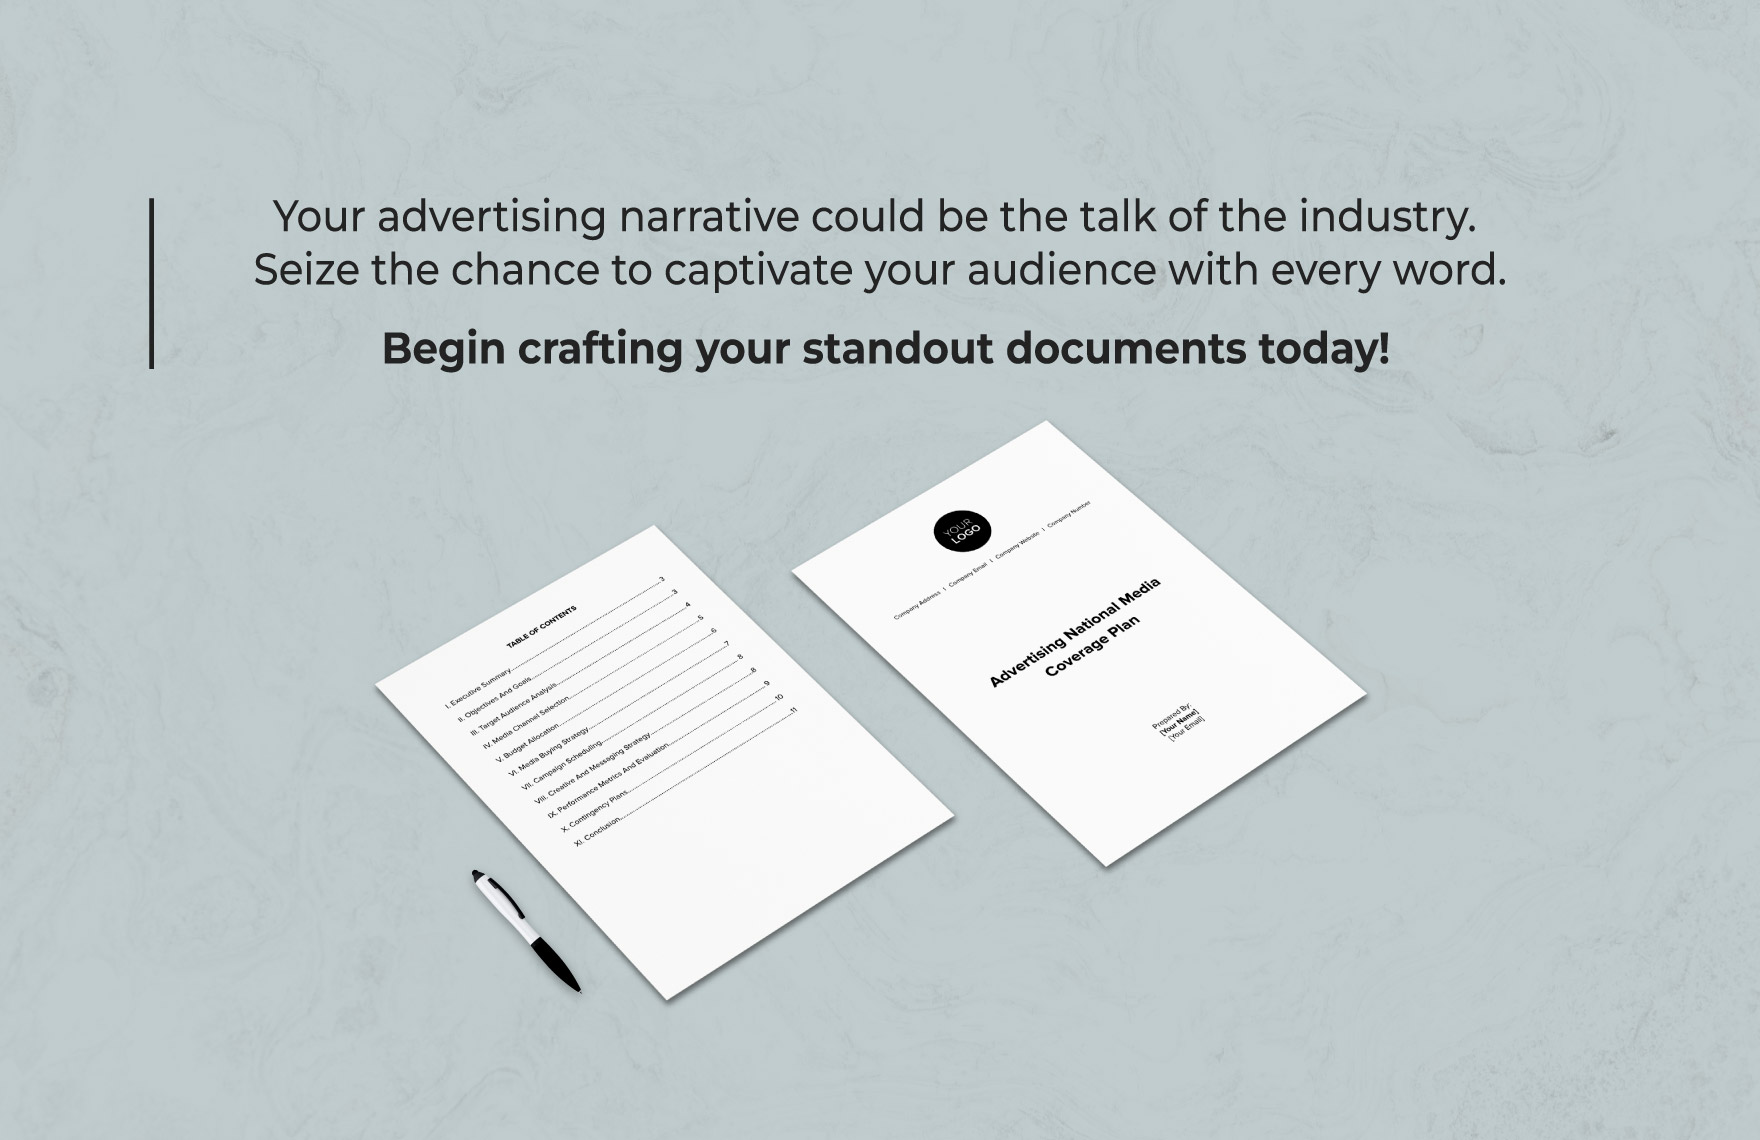 Advertising National Media Coverage Plan Template